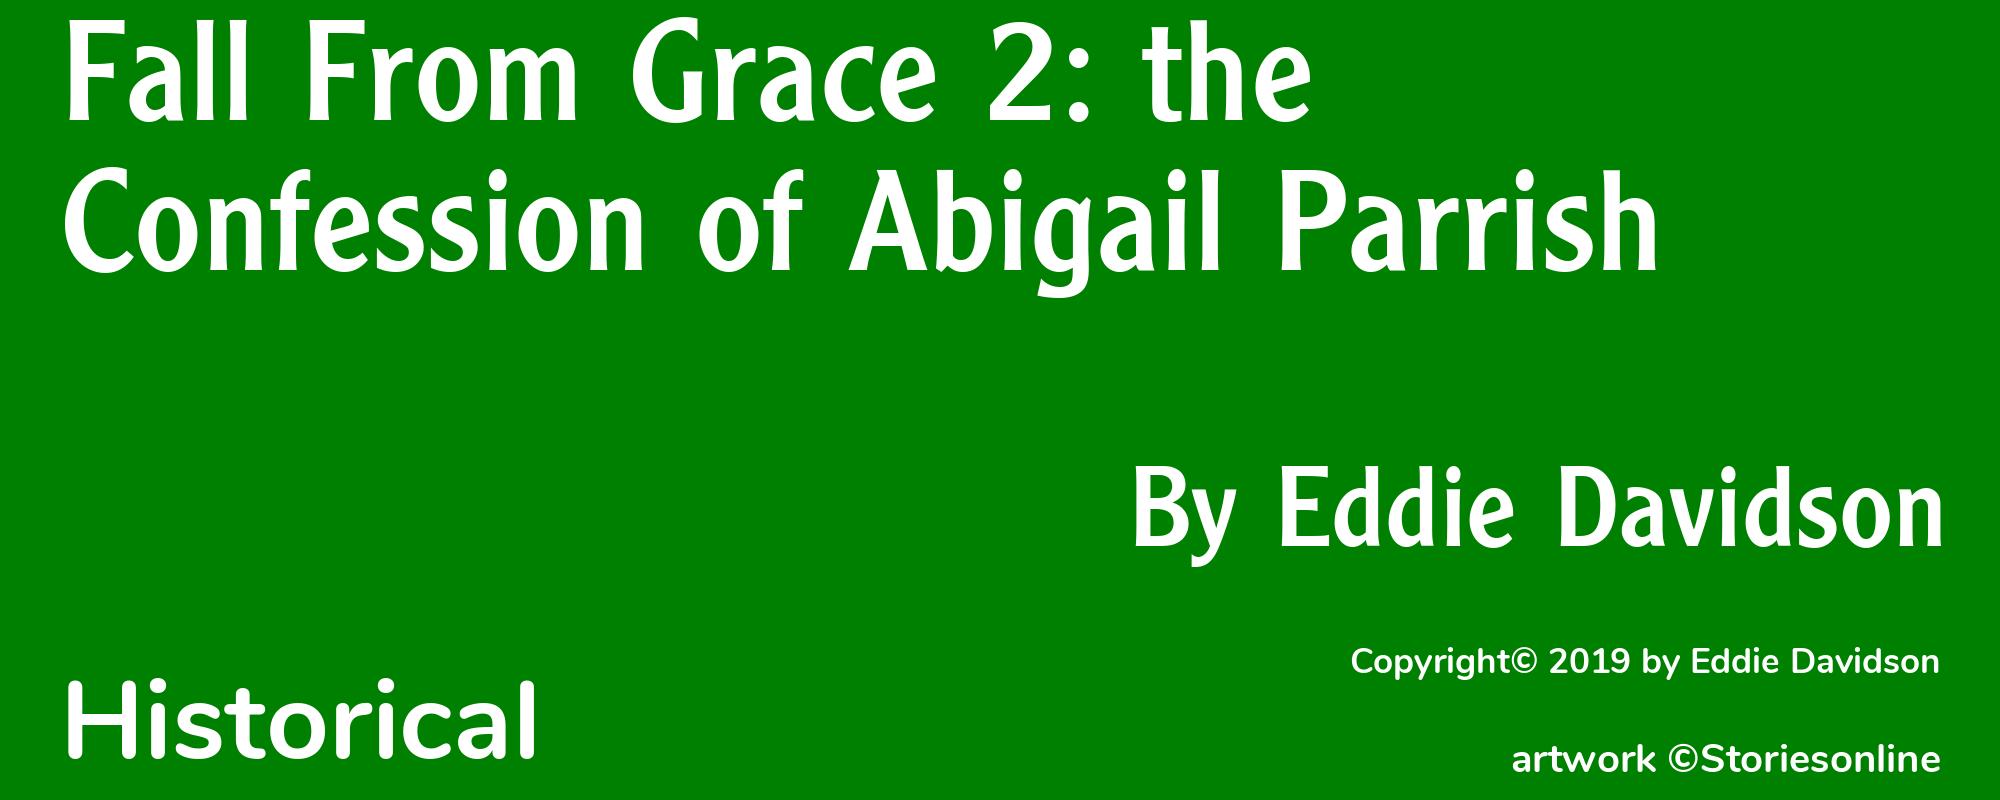 Fall From Grace 2: the Confession of Abigail Parrish - Cover